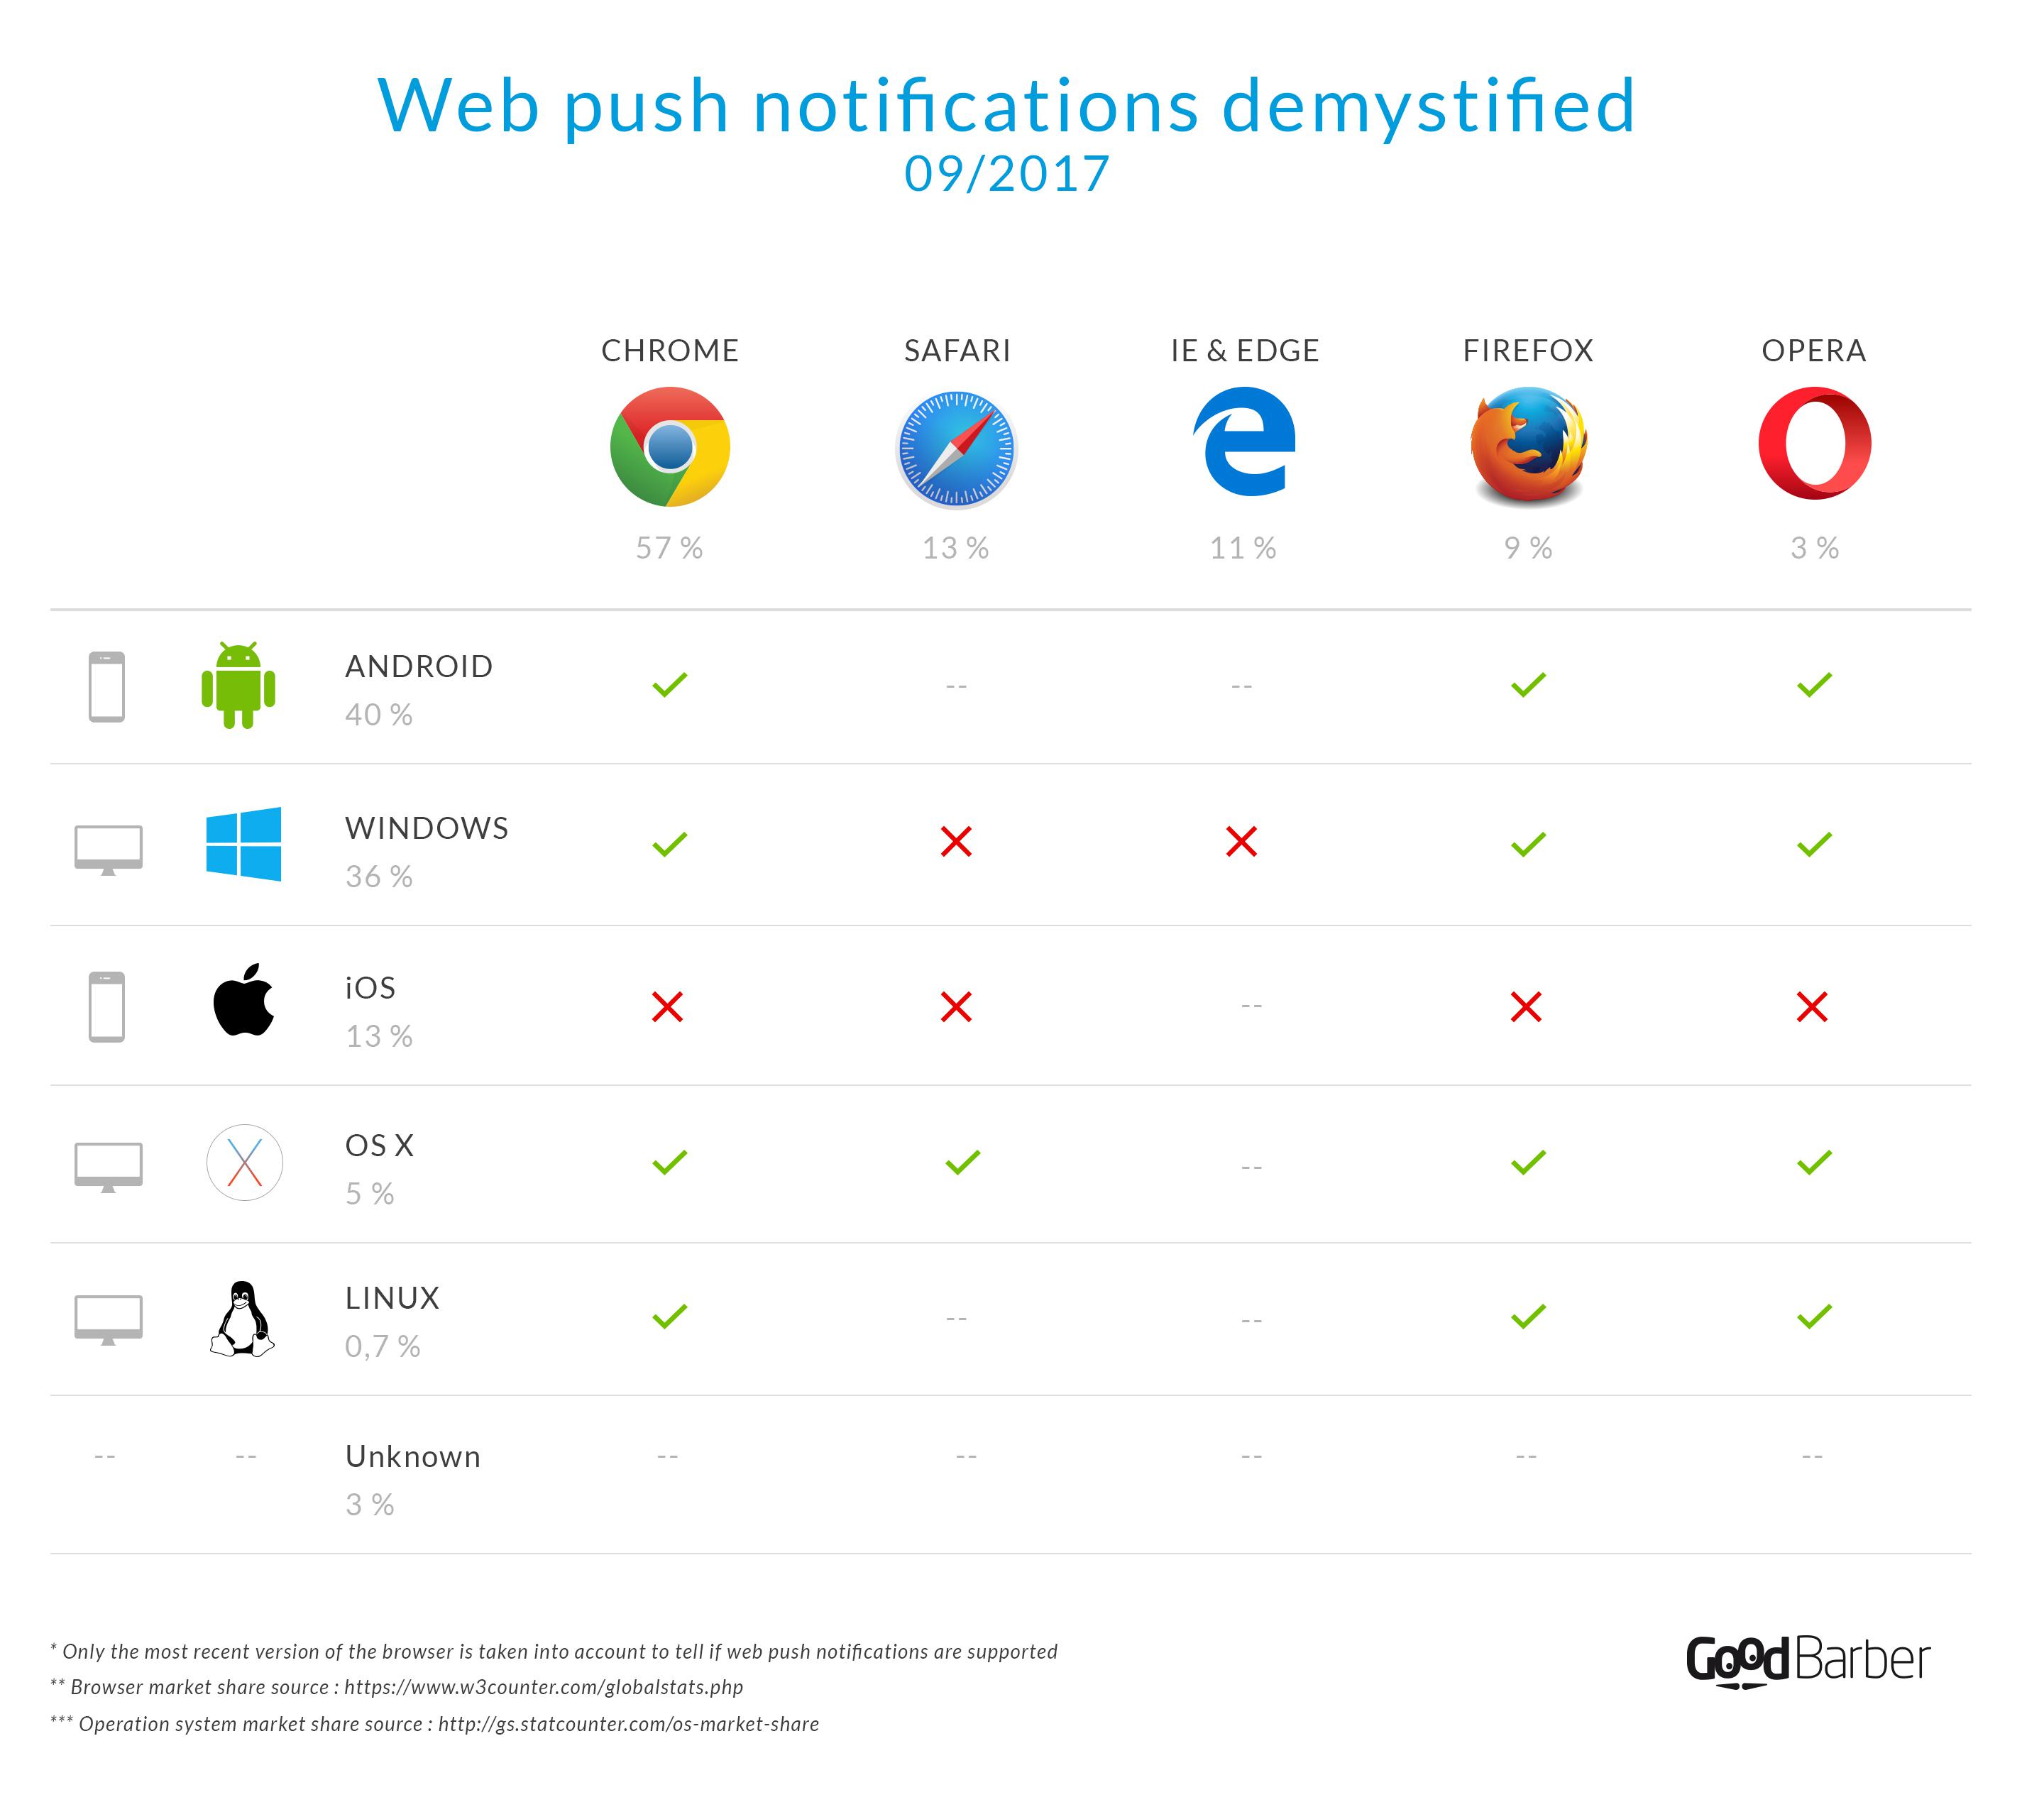 https://blog.goodbarber.com/fr/docs/img/web-push-notification-browsers-supported-demystified.jpg